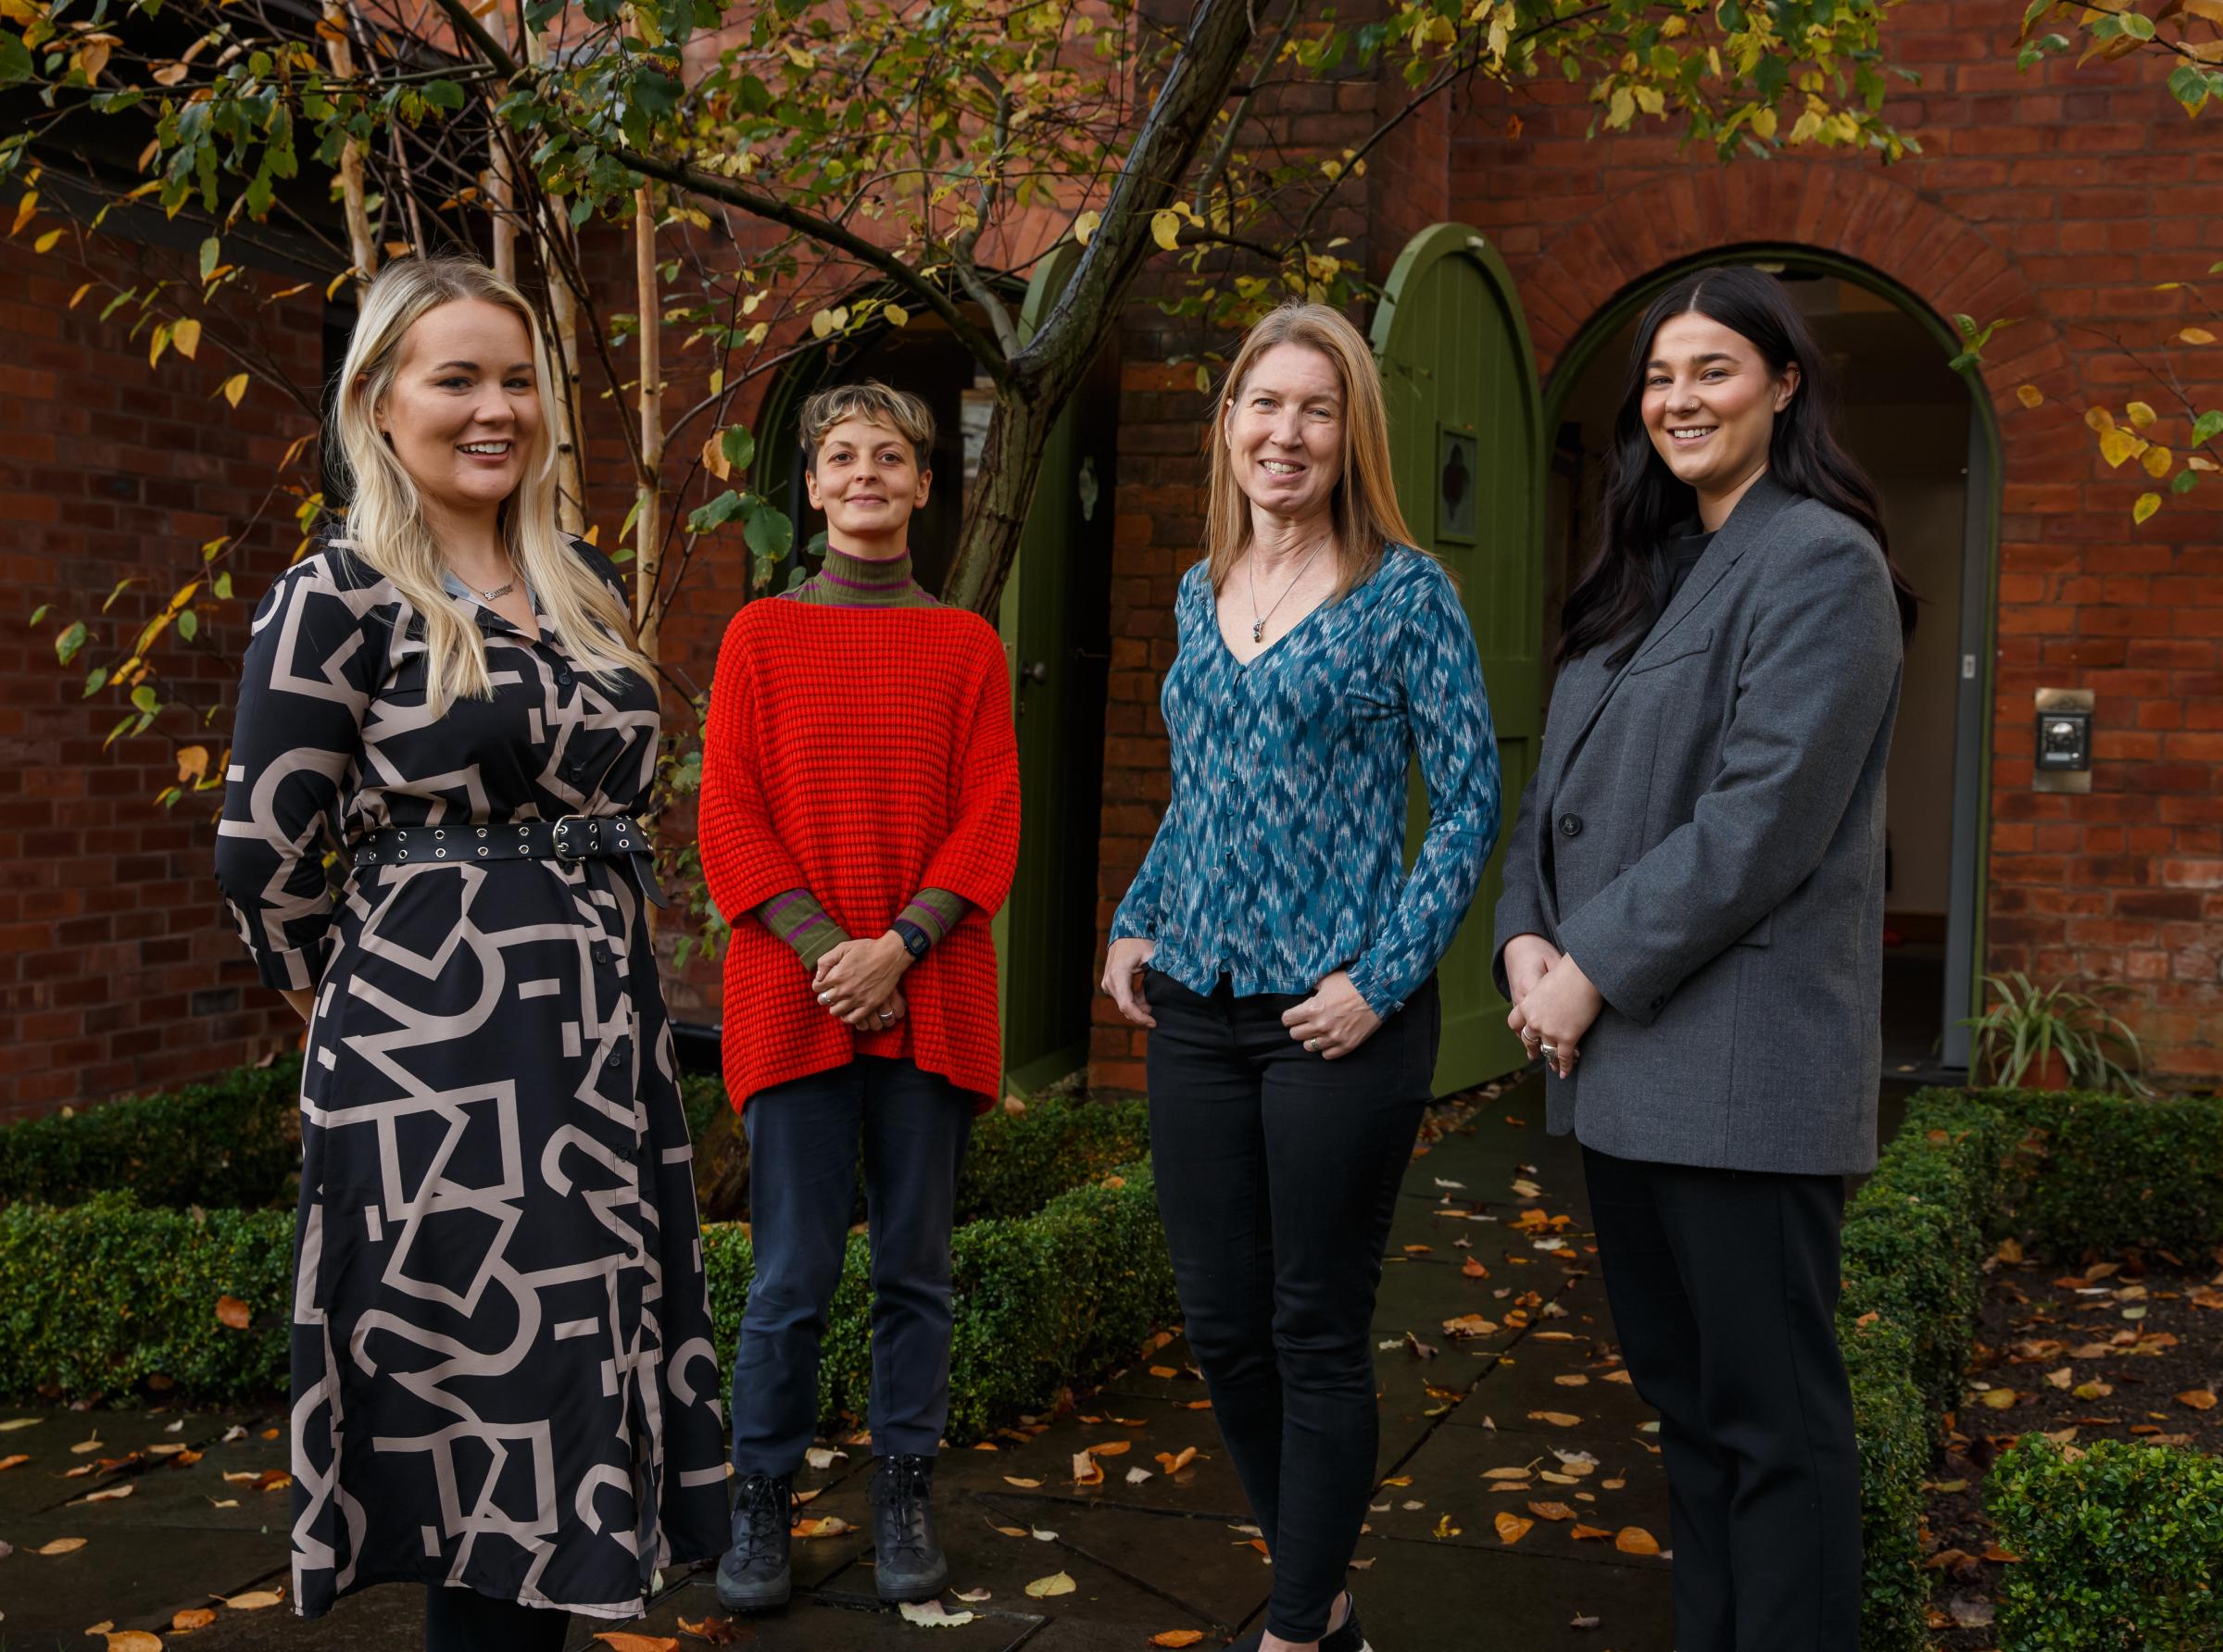 Cancer Support Scotland staff pictured at the charitys Calman Centre in the grounds of Gartnavel Hospital, Glasgow. They are from left- fundraising manager Emma Connor, digital communications assistant Annie Hyde, counsellor Debra Sinclair and